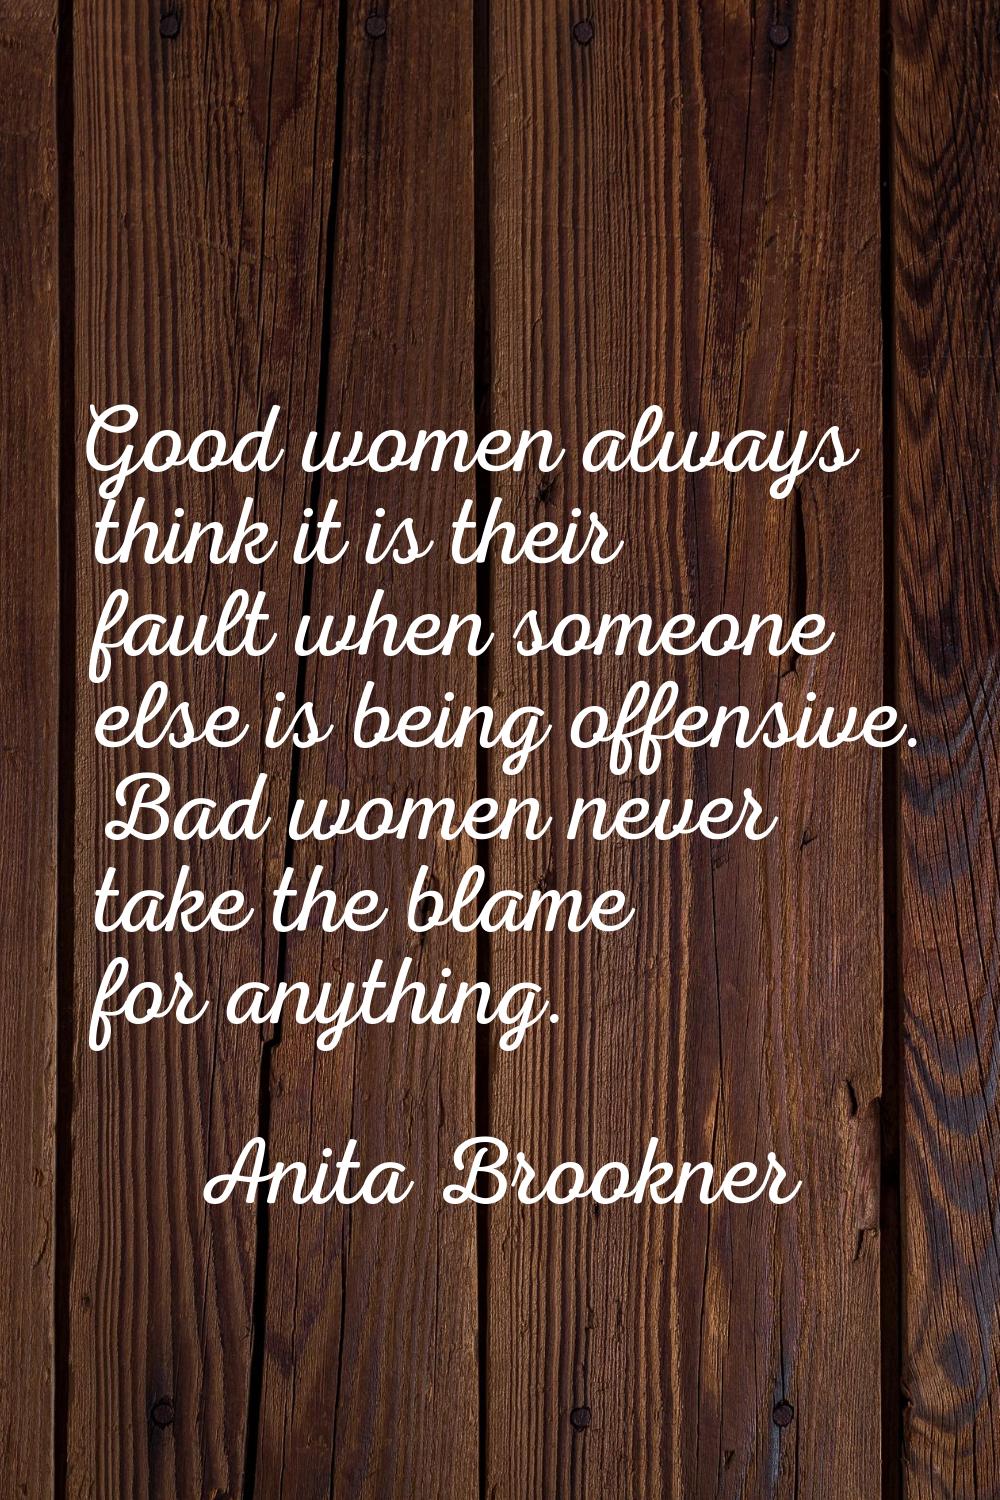 Good women always think it is their fault when someone else is being offensive. Bad women never tak